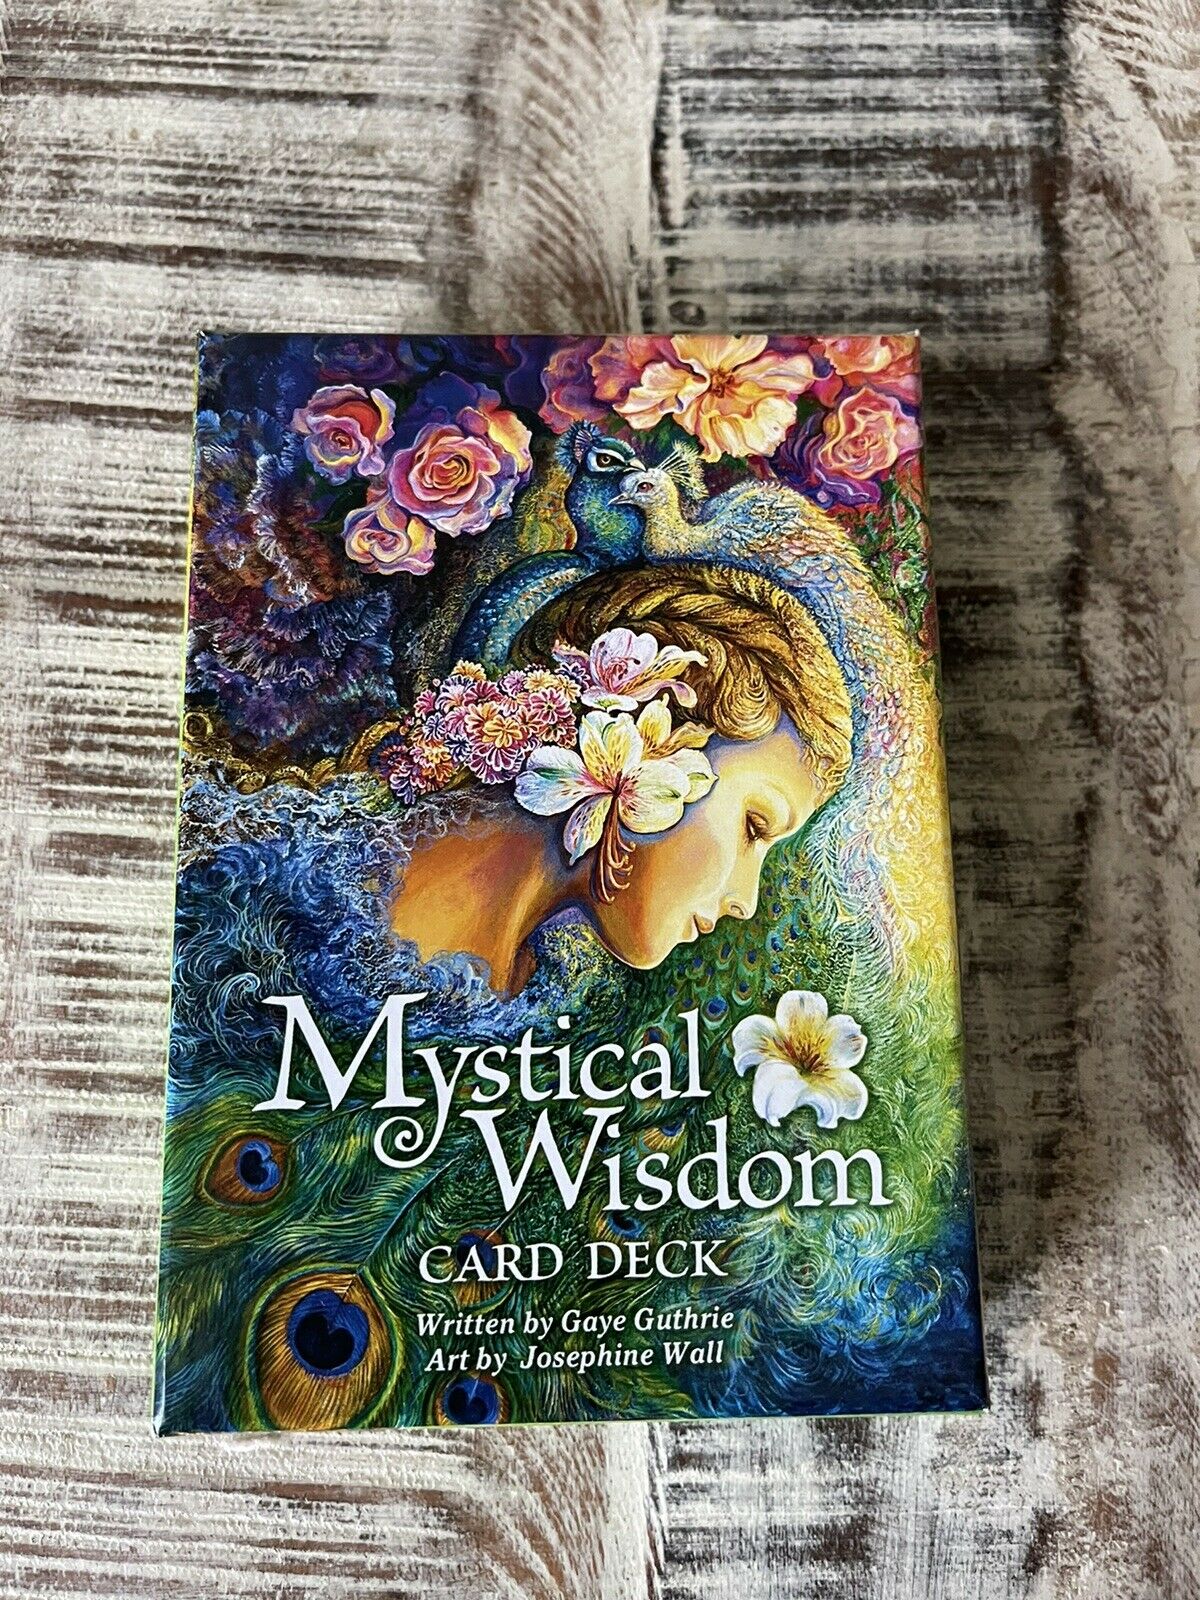 Mystical Wisdom Card Deck Gaye Guthrie Josephine Wall With Guide Book